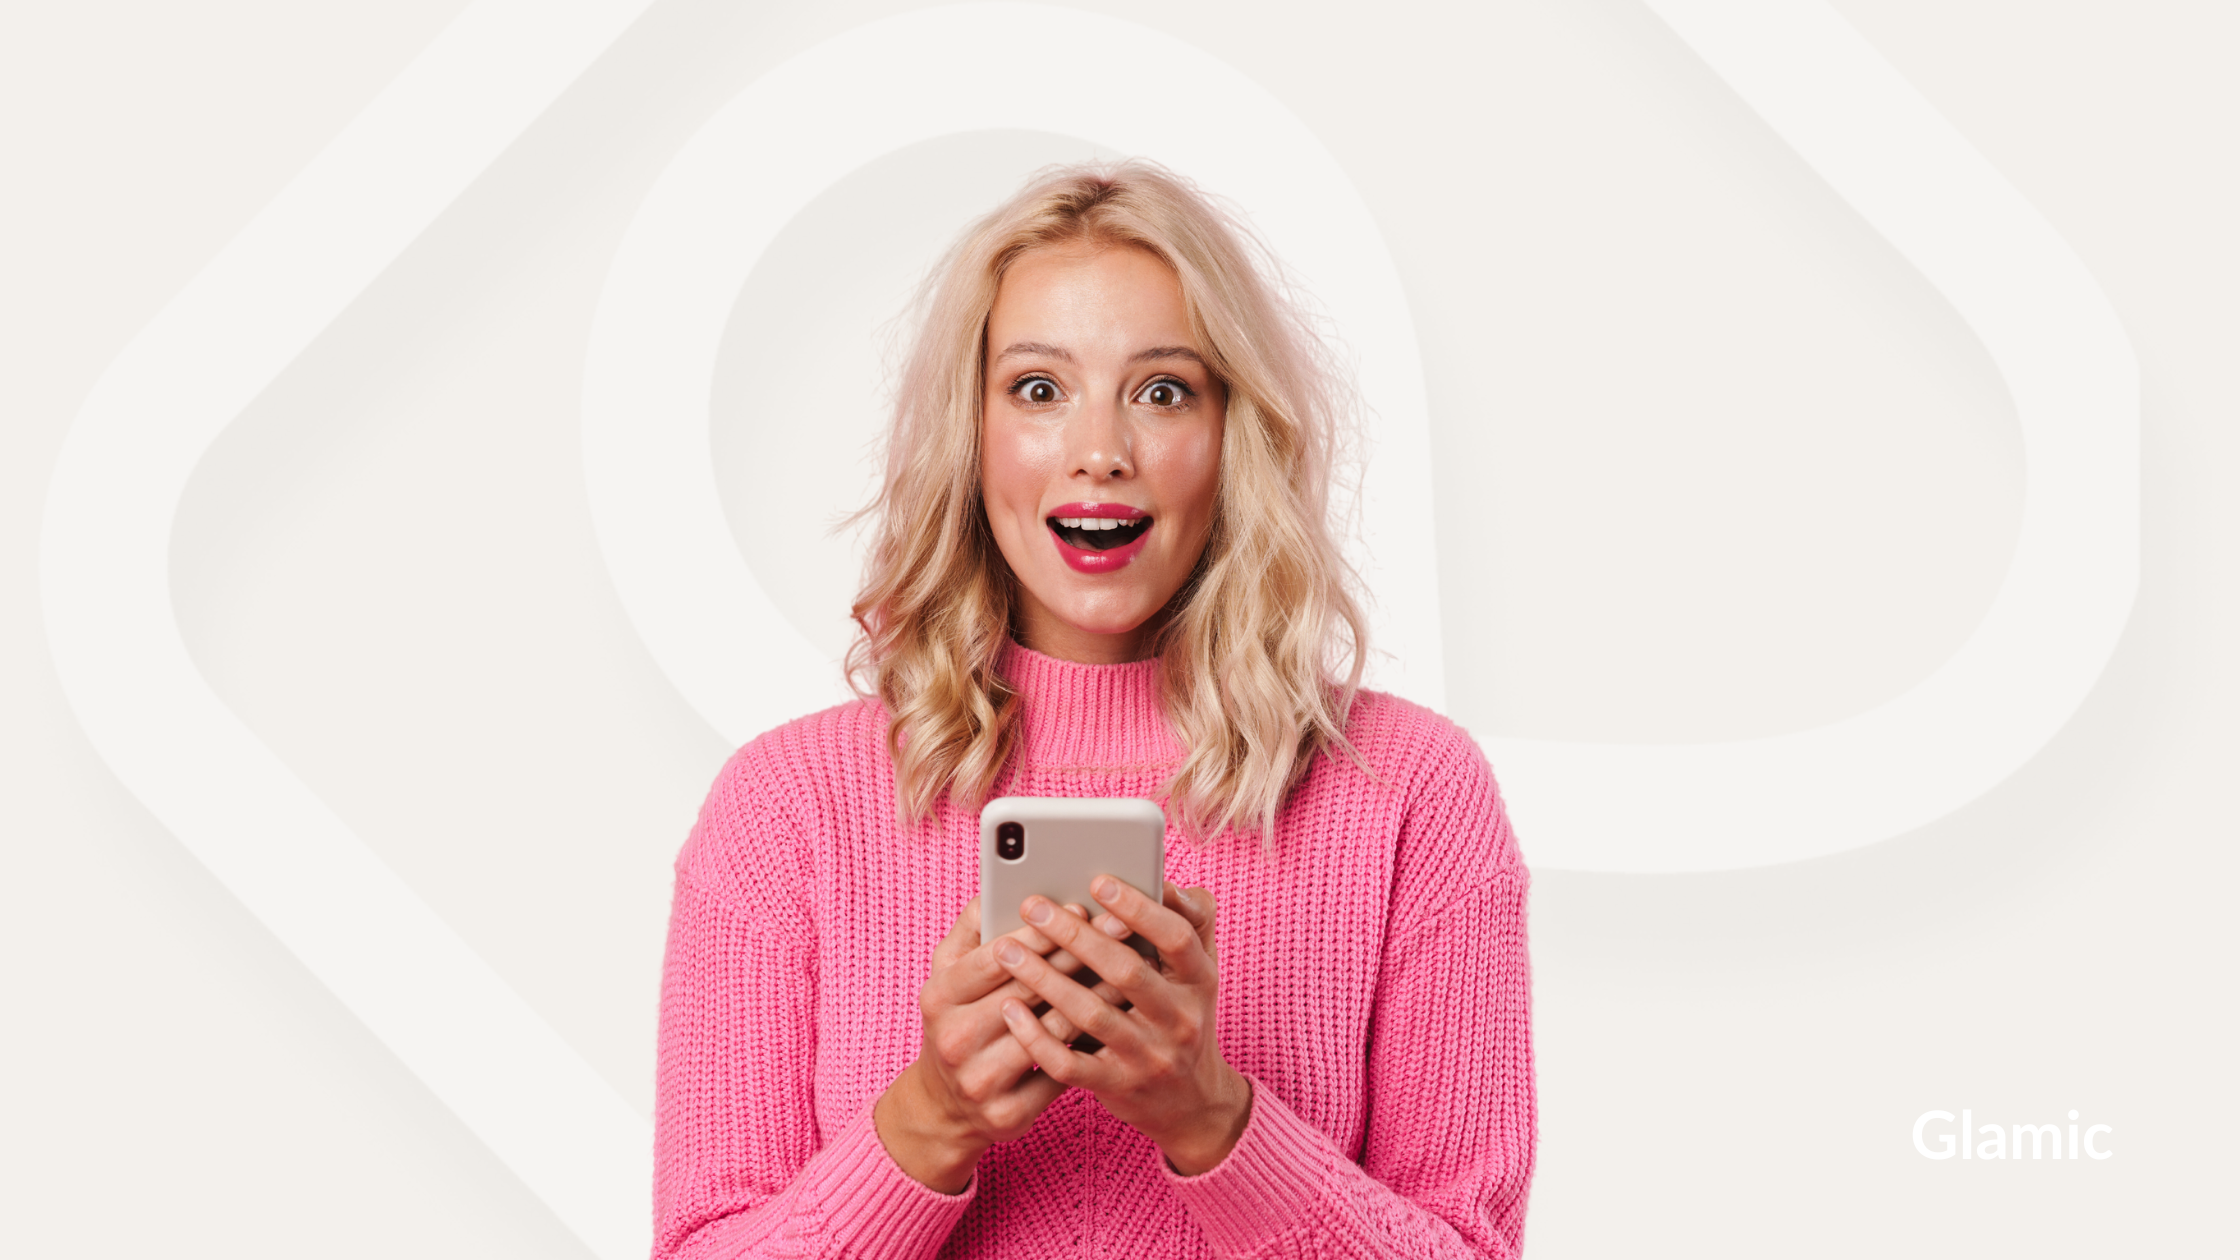 Happy blonde woman in pink, holding a phone, surprised by the Glamic app, with a beige background and Glamic logo